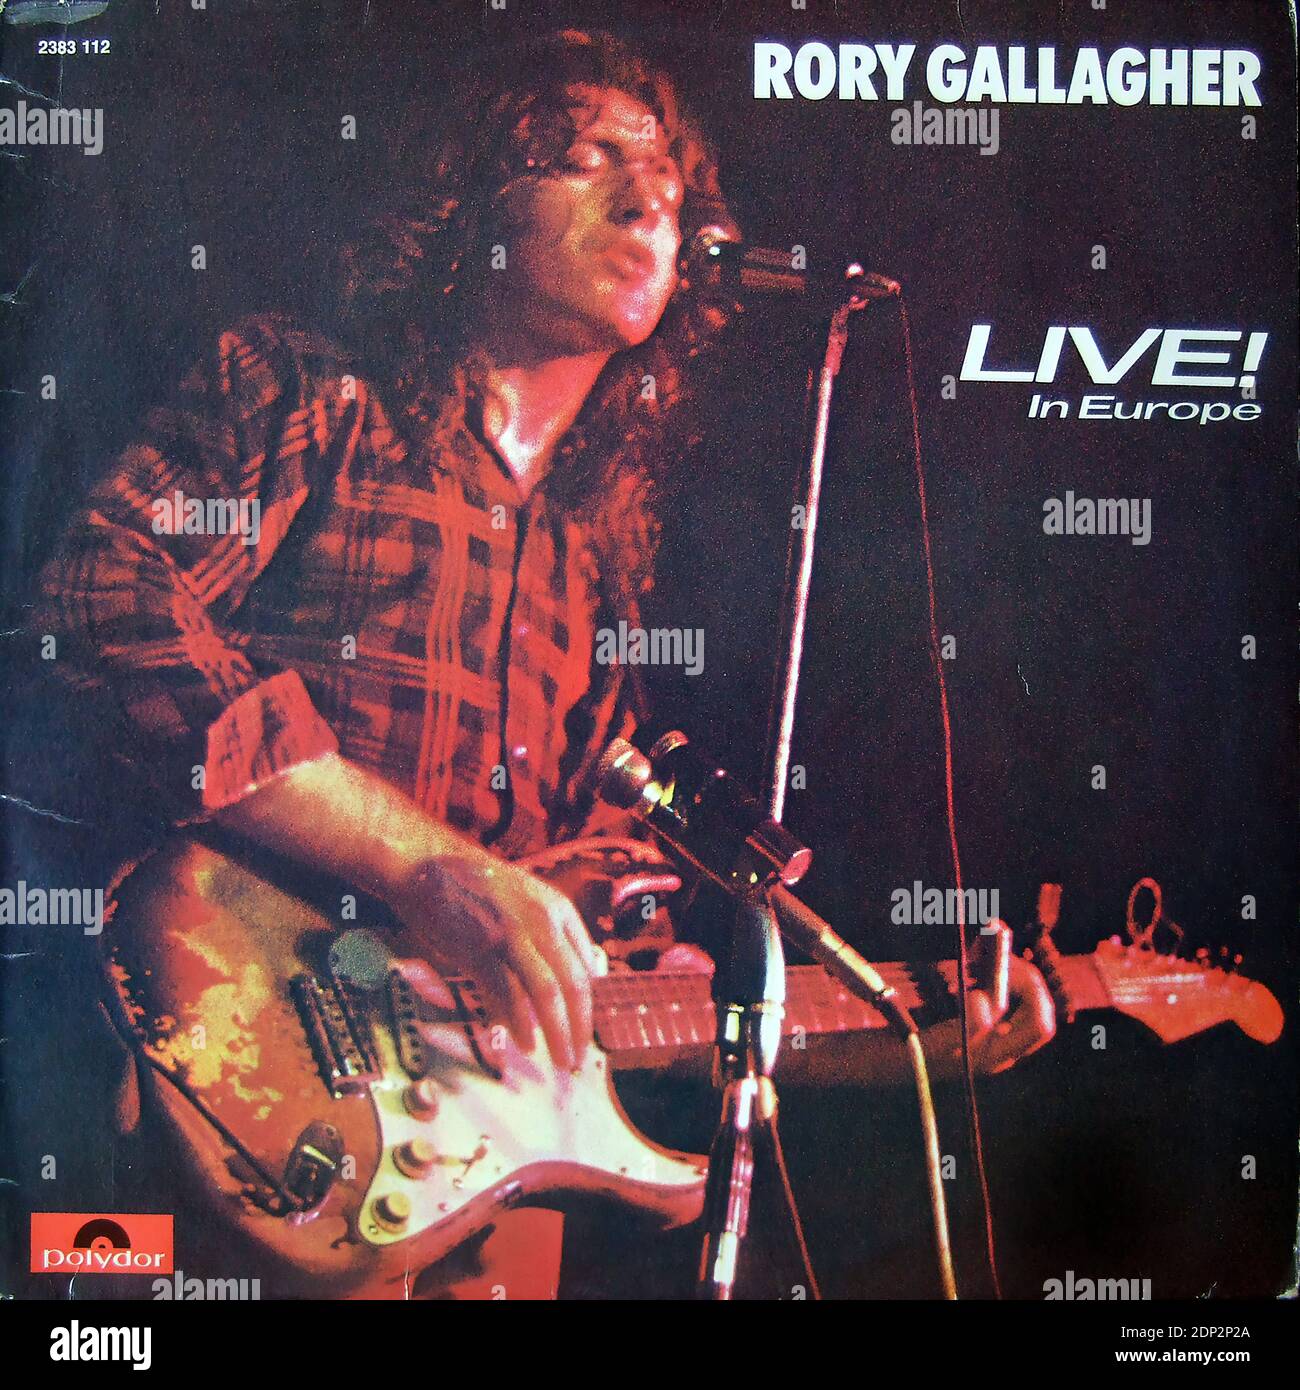 Rory Gallagher - Live! in Europe - Vintage vinyl album cover Stock Photo